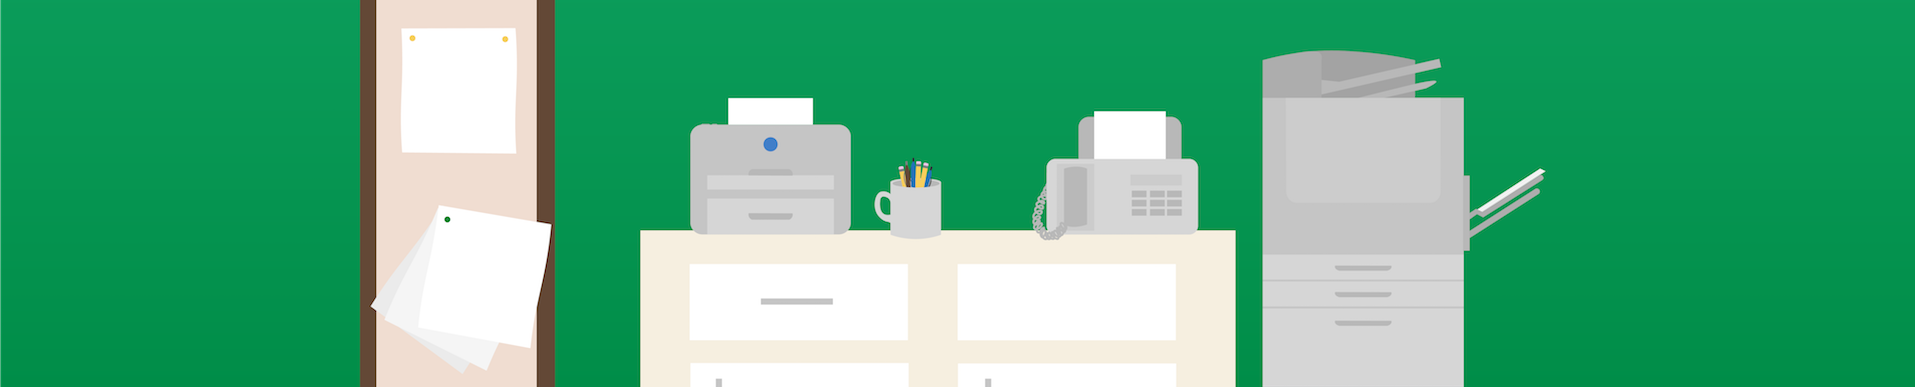 How to find the most energy-efficient printers, copiers and fax machines for small businesses